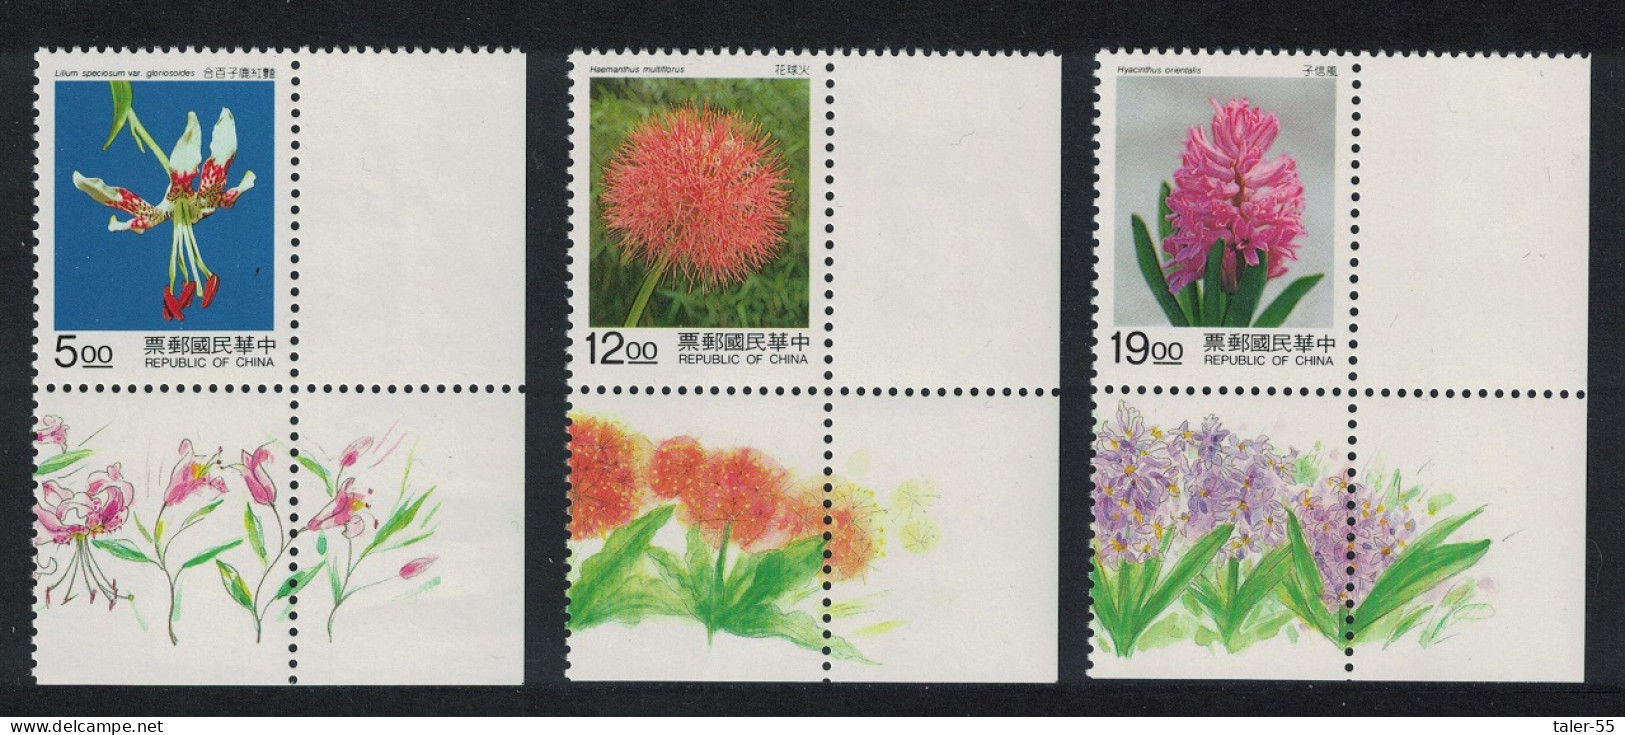 Taiwan Hyacinth Lily Bulbous Flowers 3v Corners 1995 MNH SG#2243-2245 - Unused Stamps